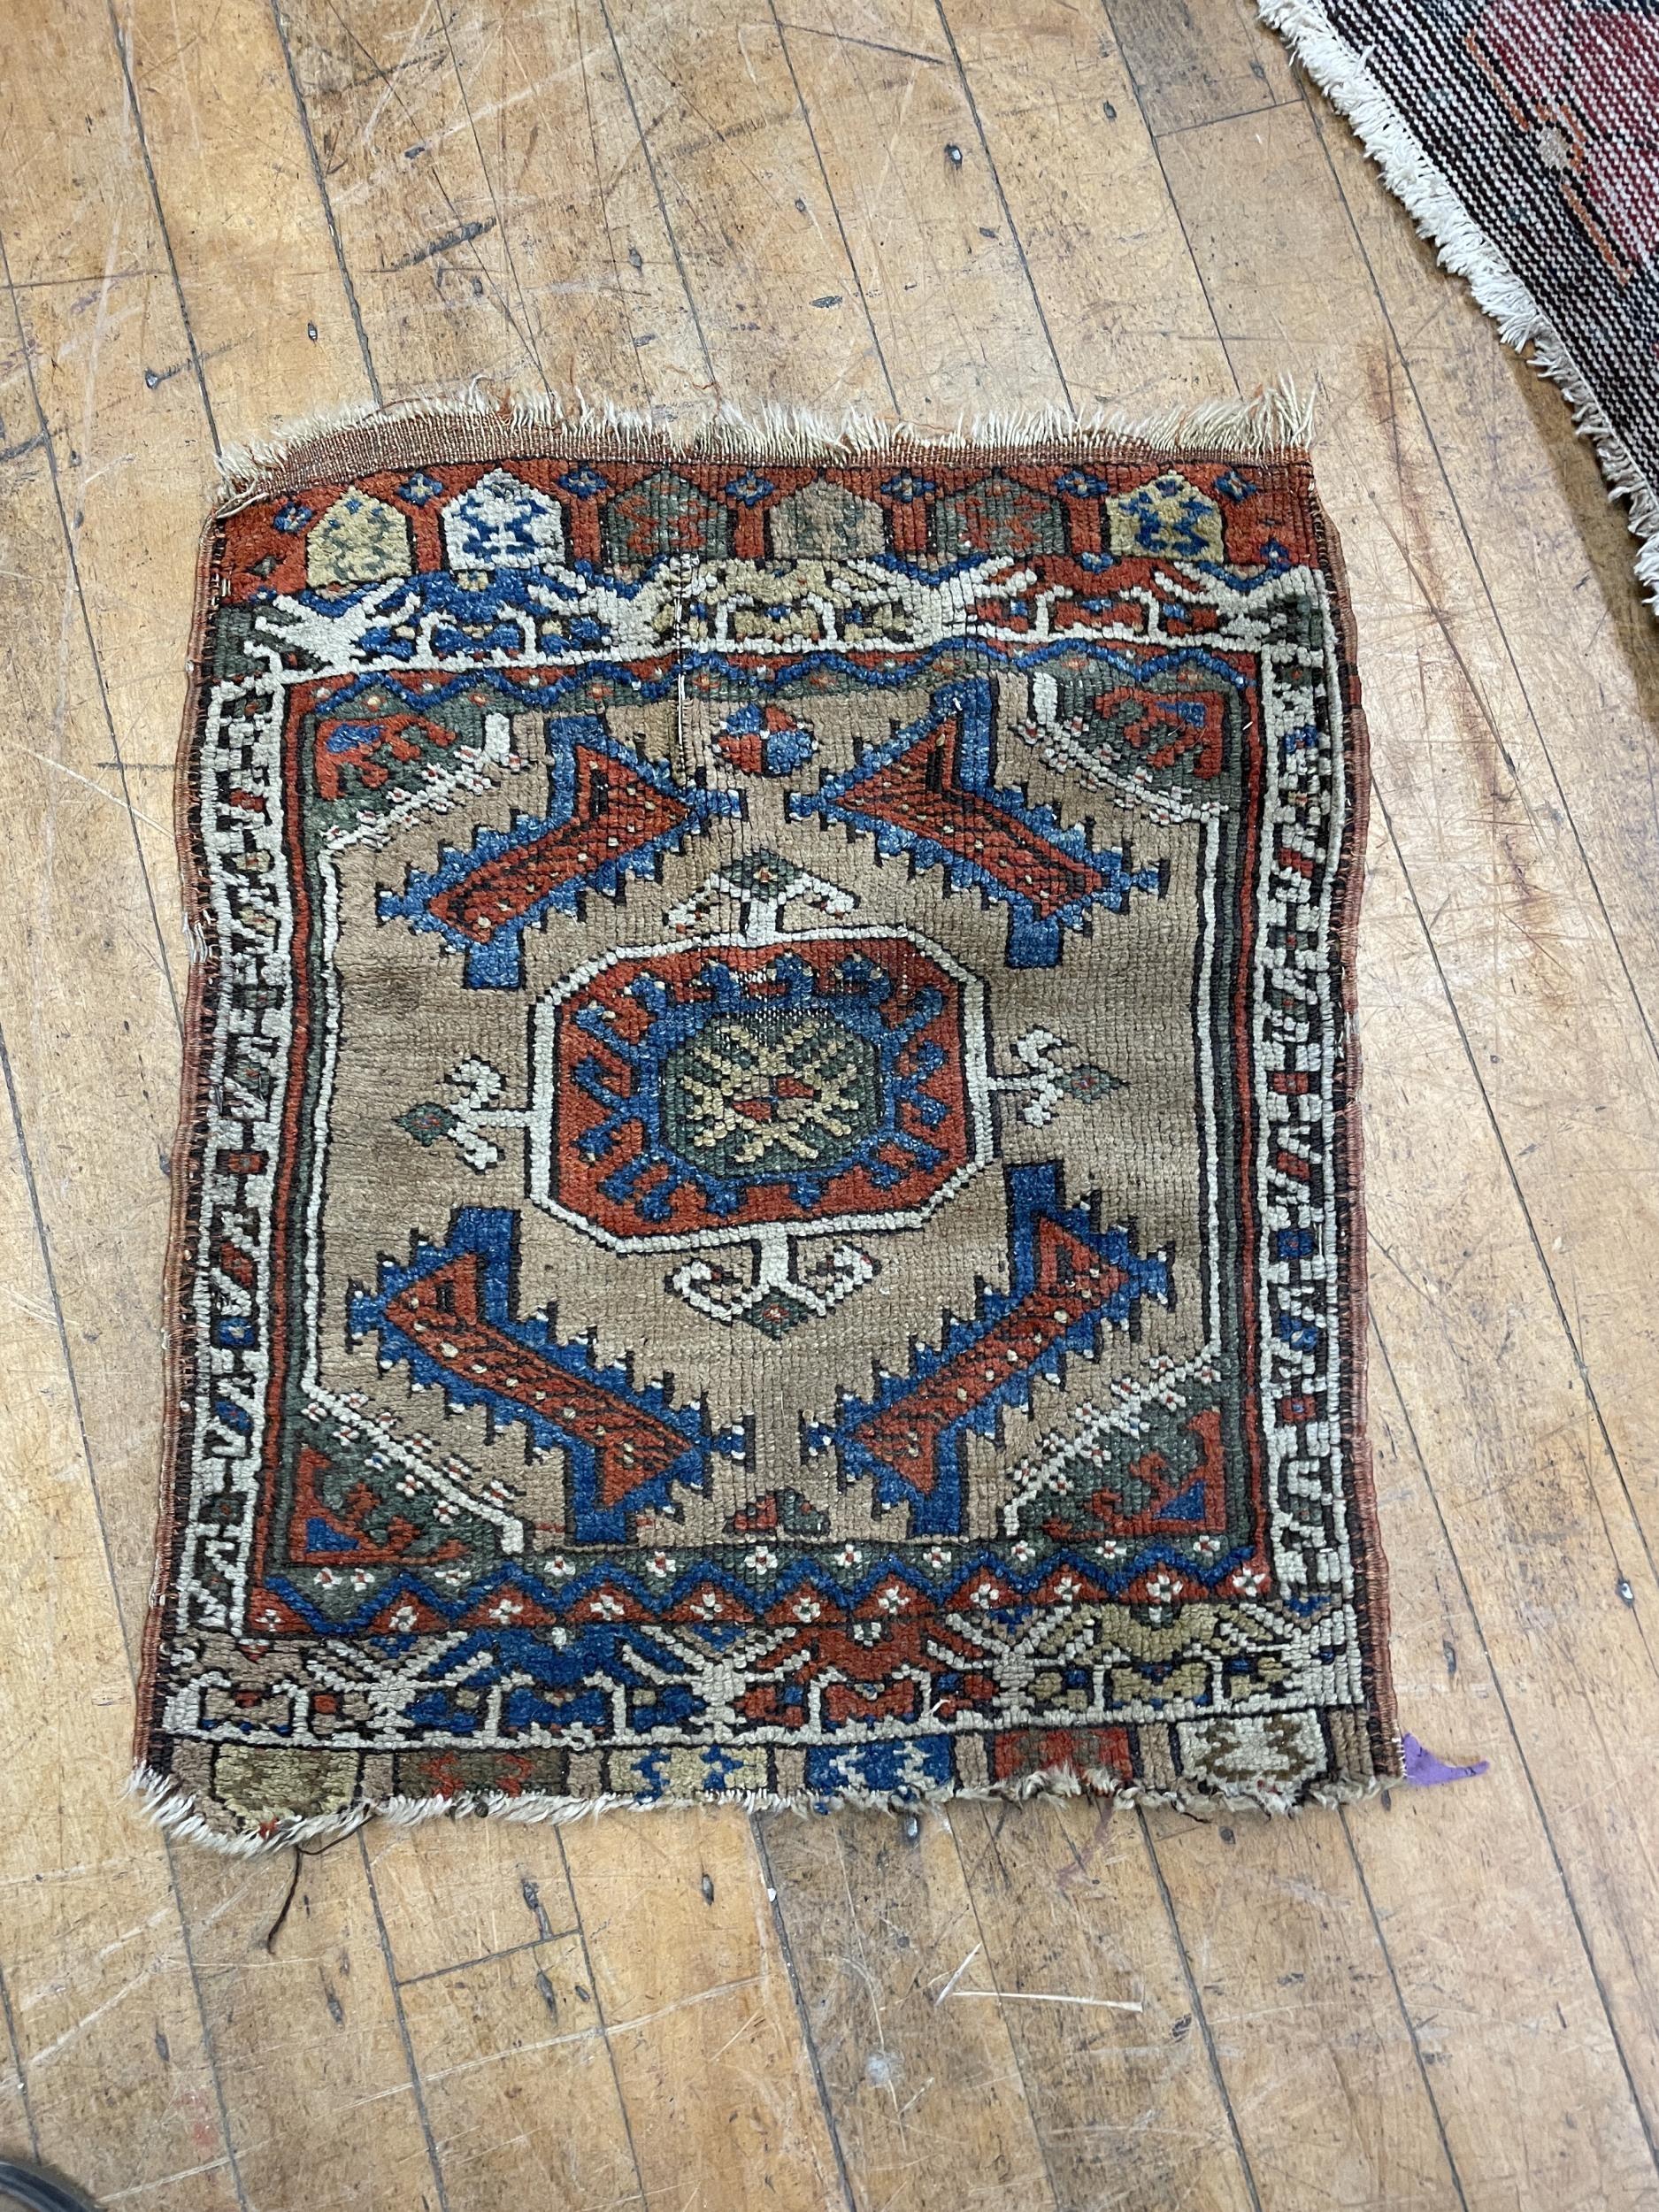 A Persian red ground rug, 284 x 79 cm, and a Persian rug, 64 x 54 cm